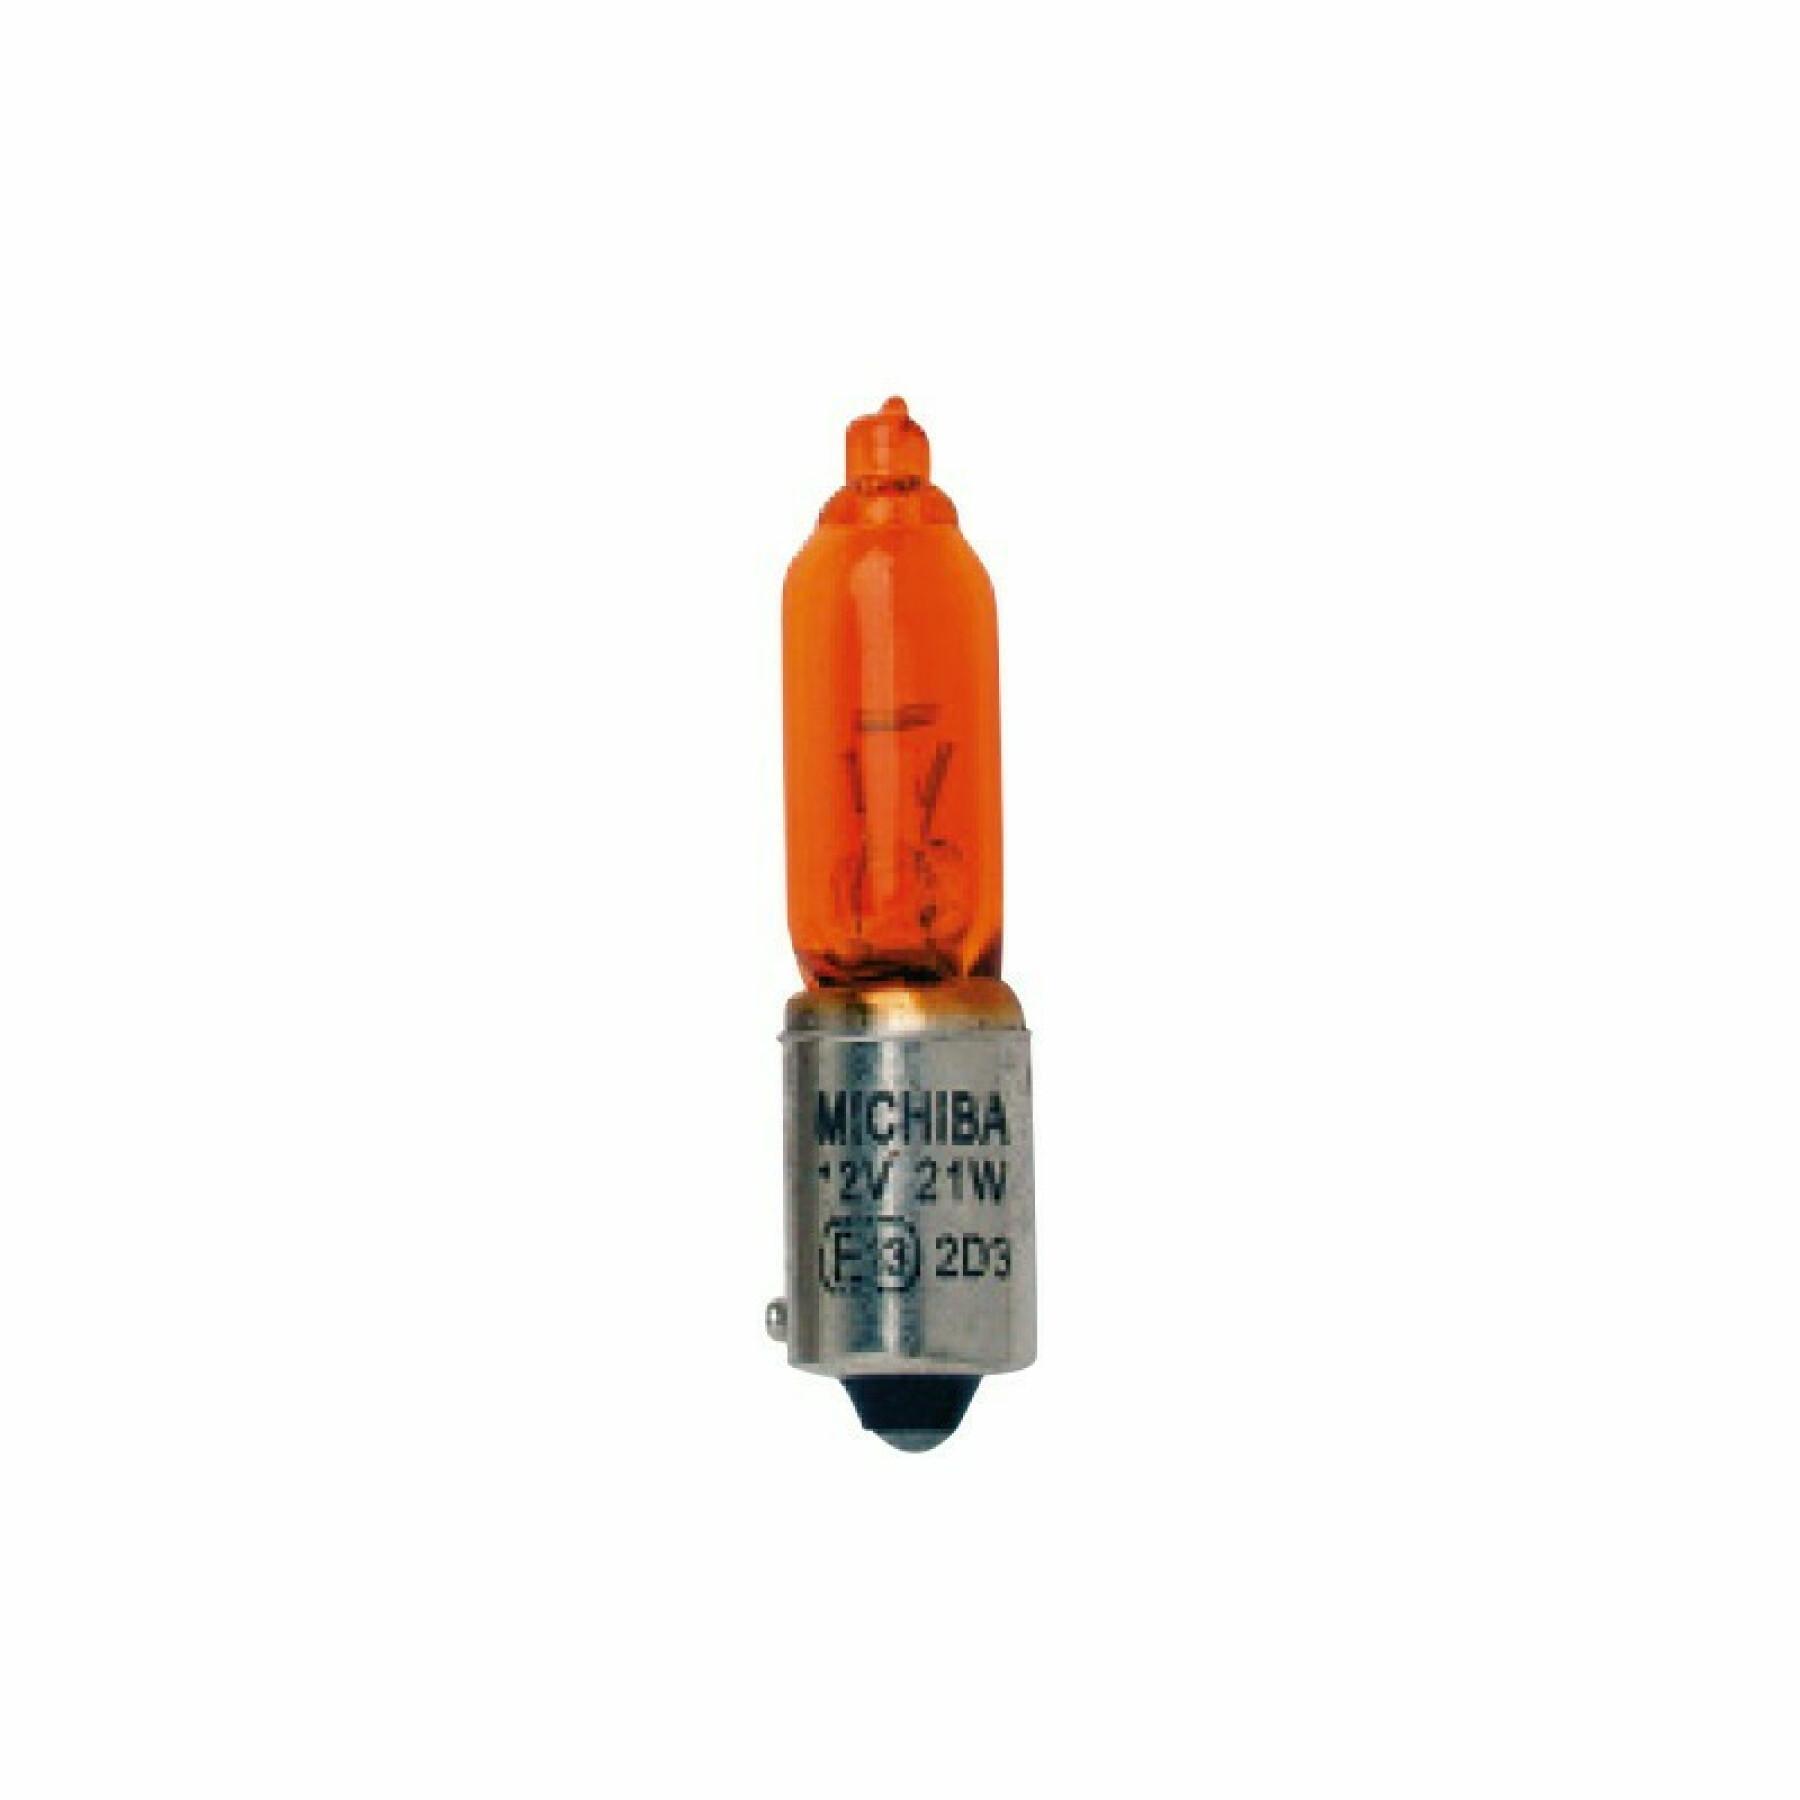 Pack of 10 approved bulbsaok-es Chaft